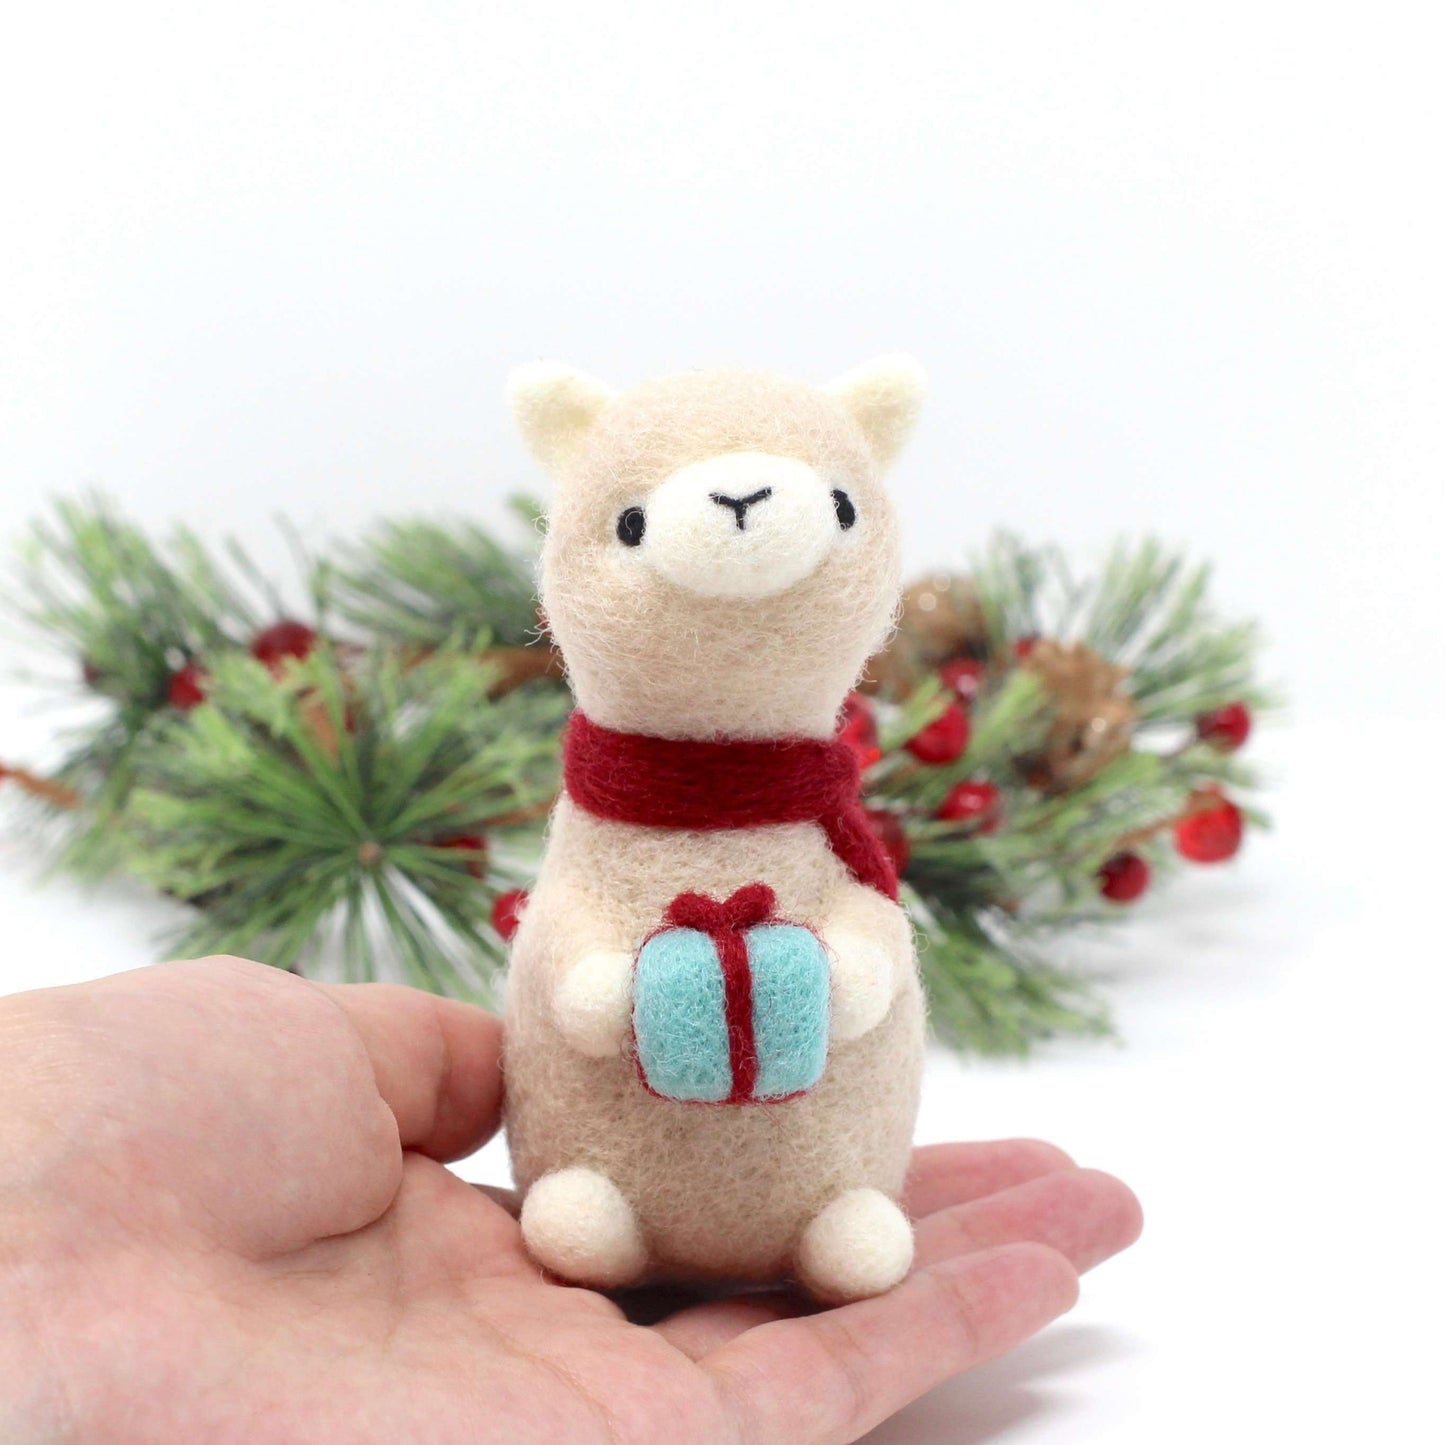 Needle Felted Alpaca holding Christmas Gift by Wild Whimsy Woolies